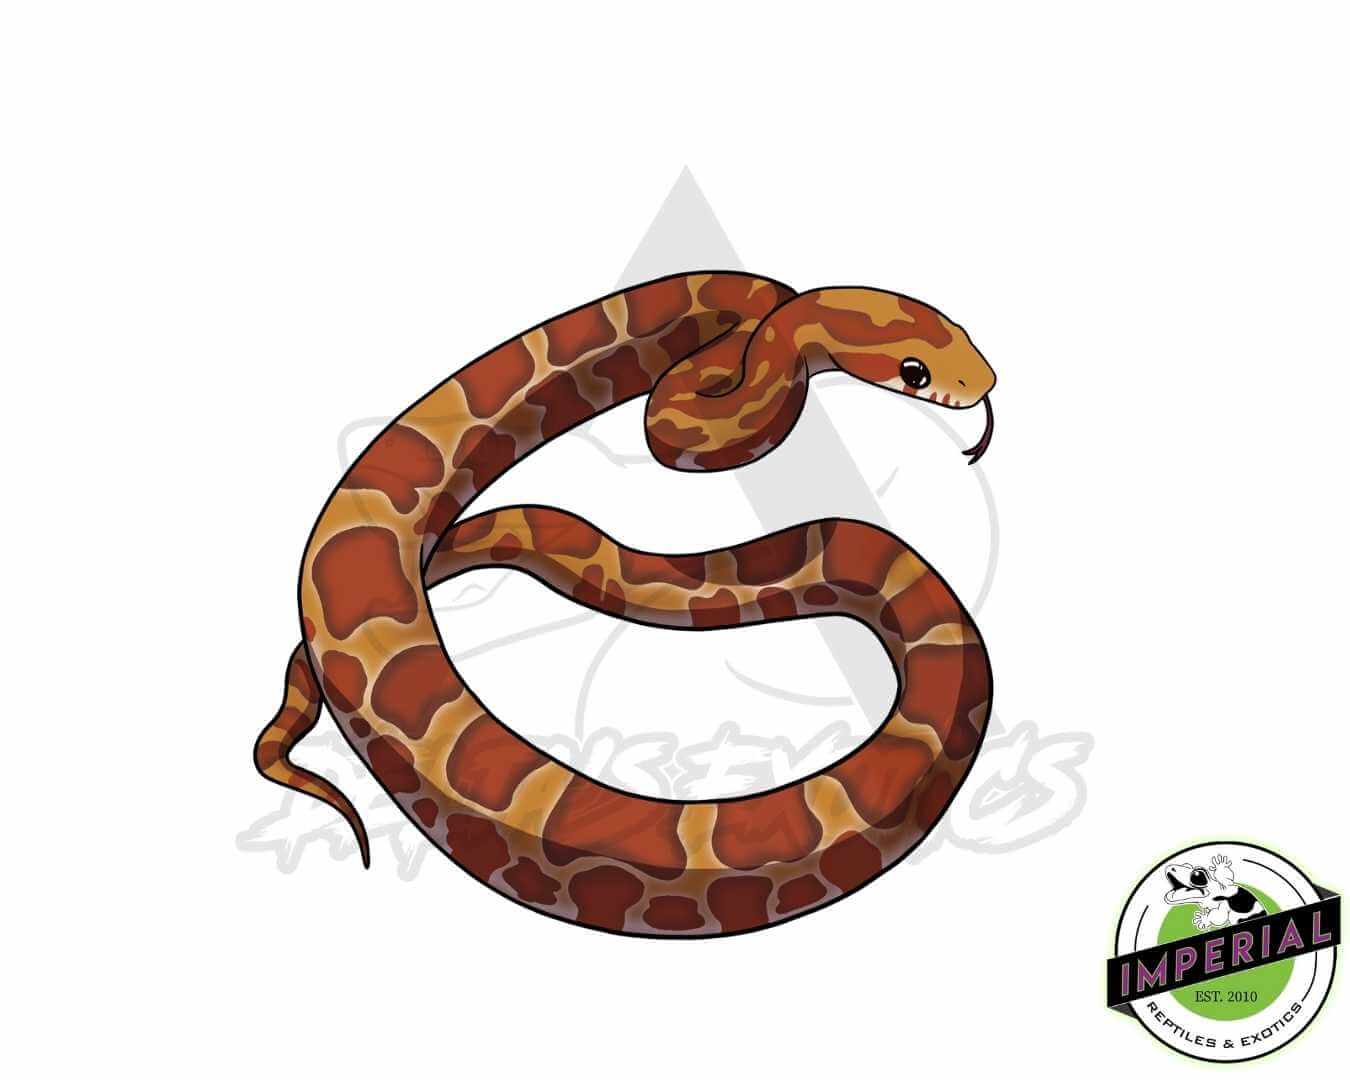 buy unique reptile stickers online at cheap prices. water proof reptile stickers for notebooks, laptops, phone cases, and more